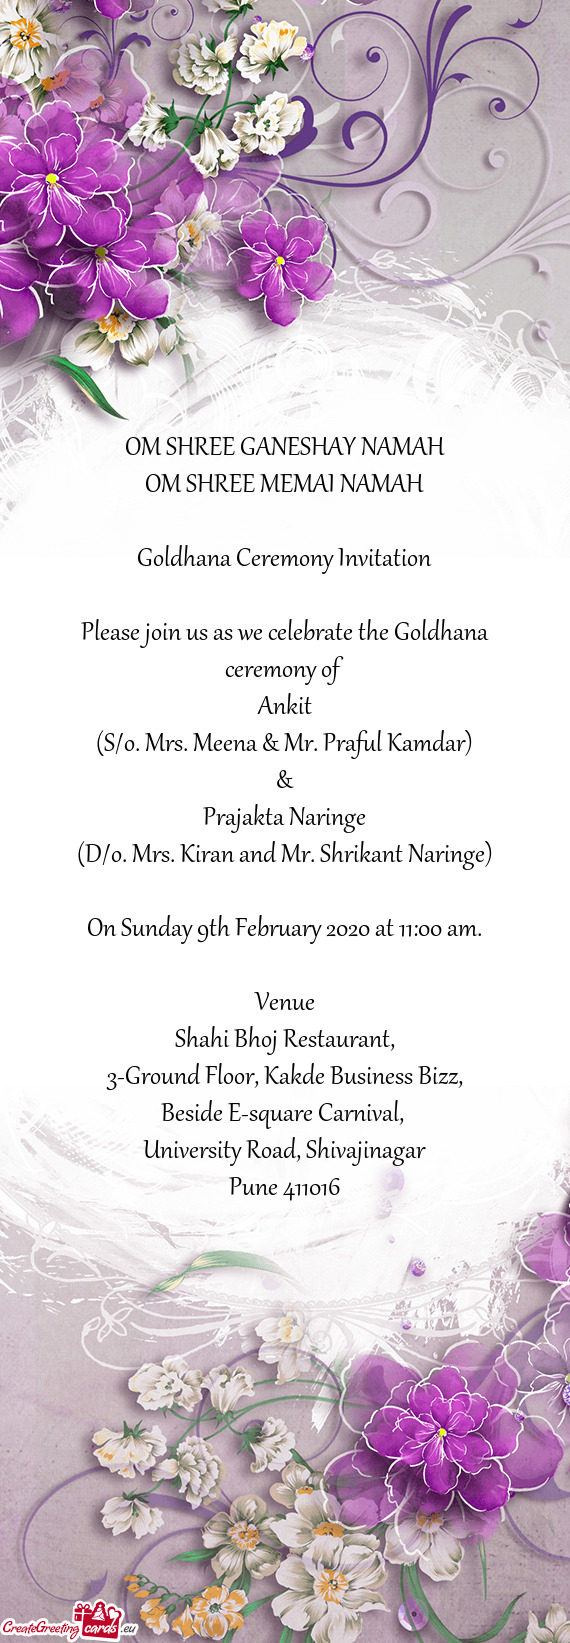 Please join us as we celebrate the Goldhana ceremony of